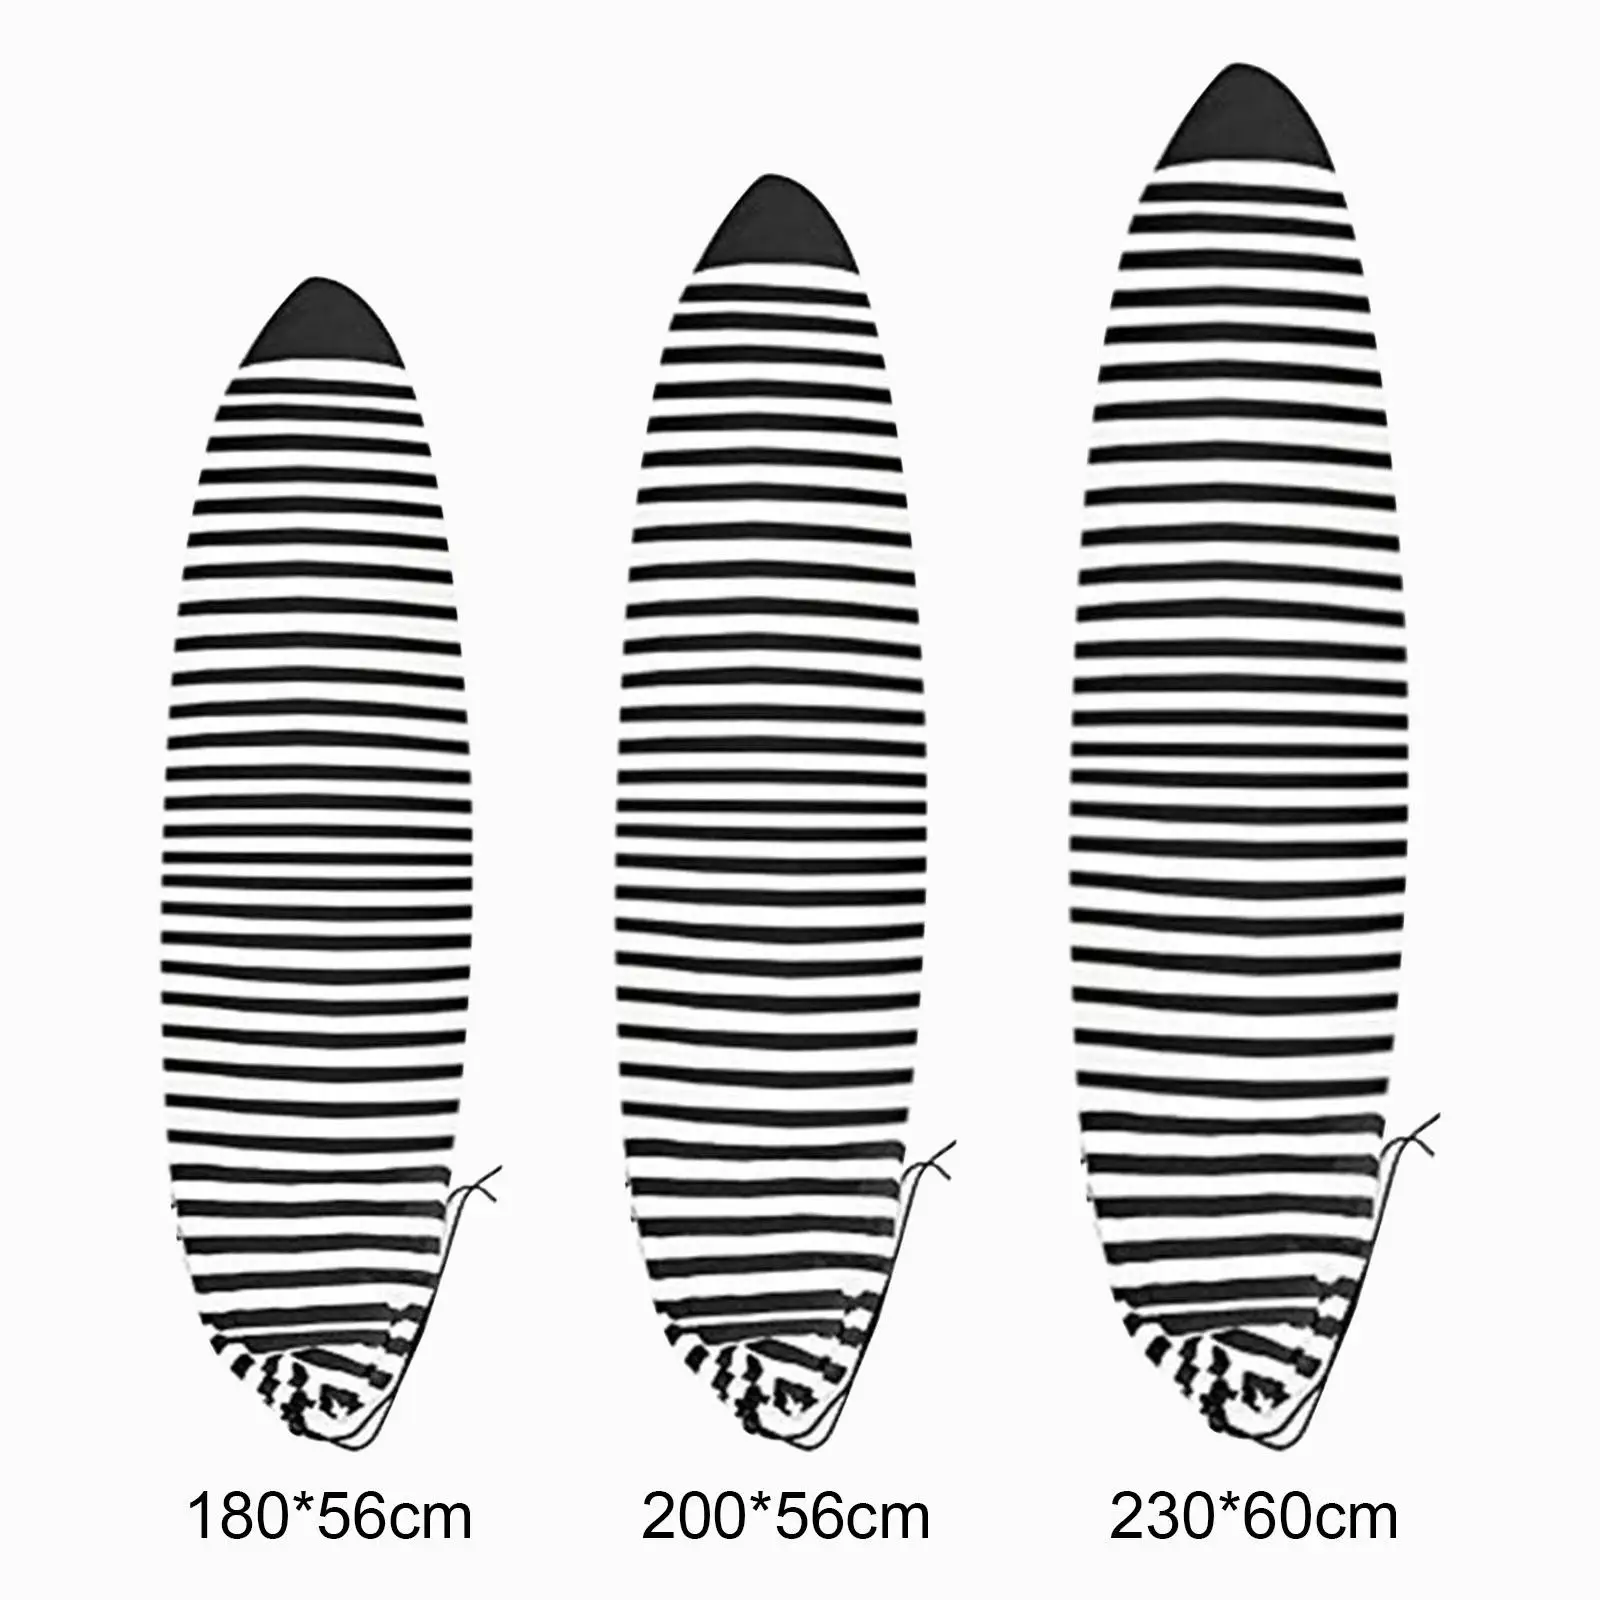 Elastic Striped Surfboard Sock Cover Lightweight Board Protective Bag Soft Storage Cover for Your Surf Board